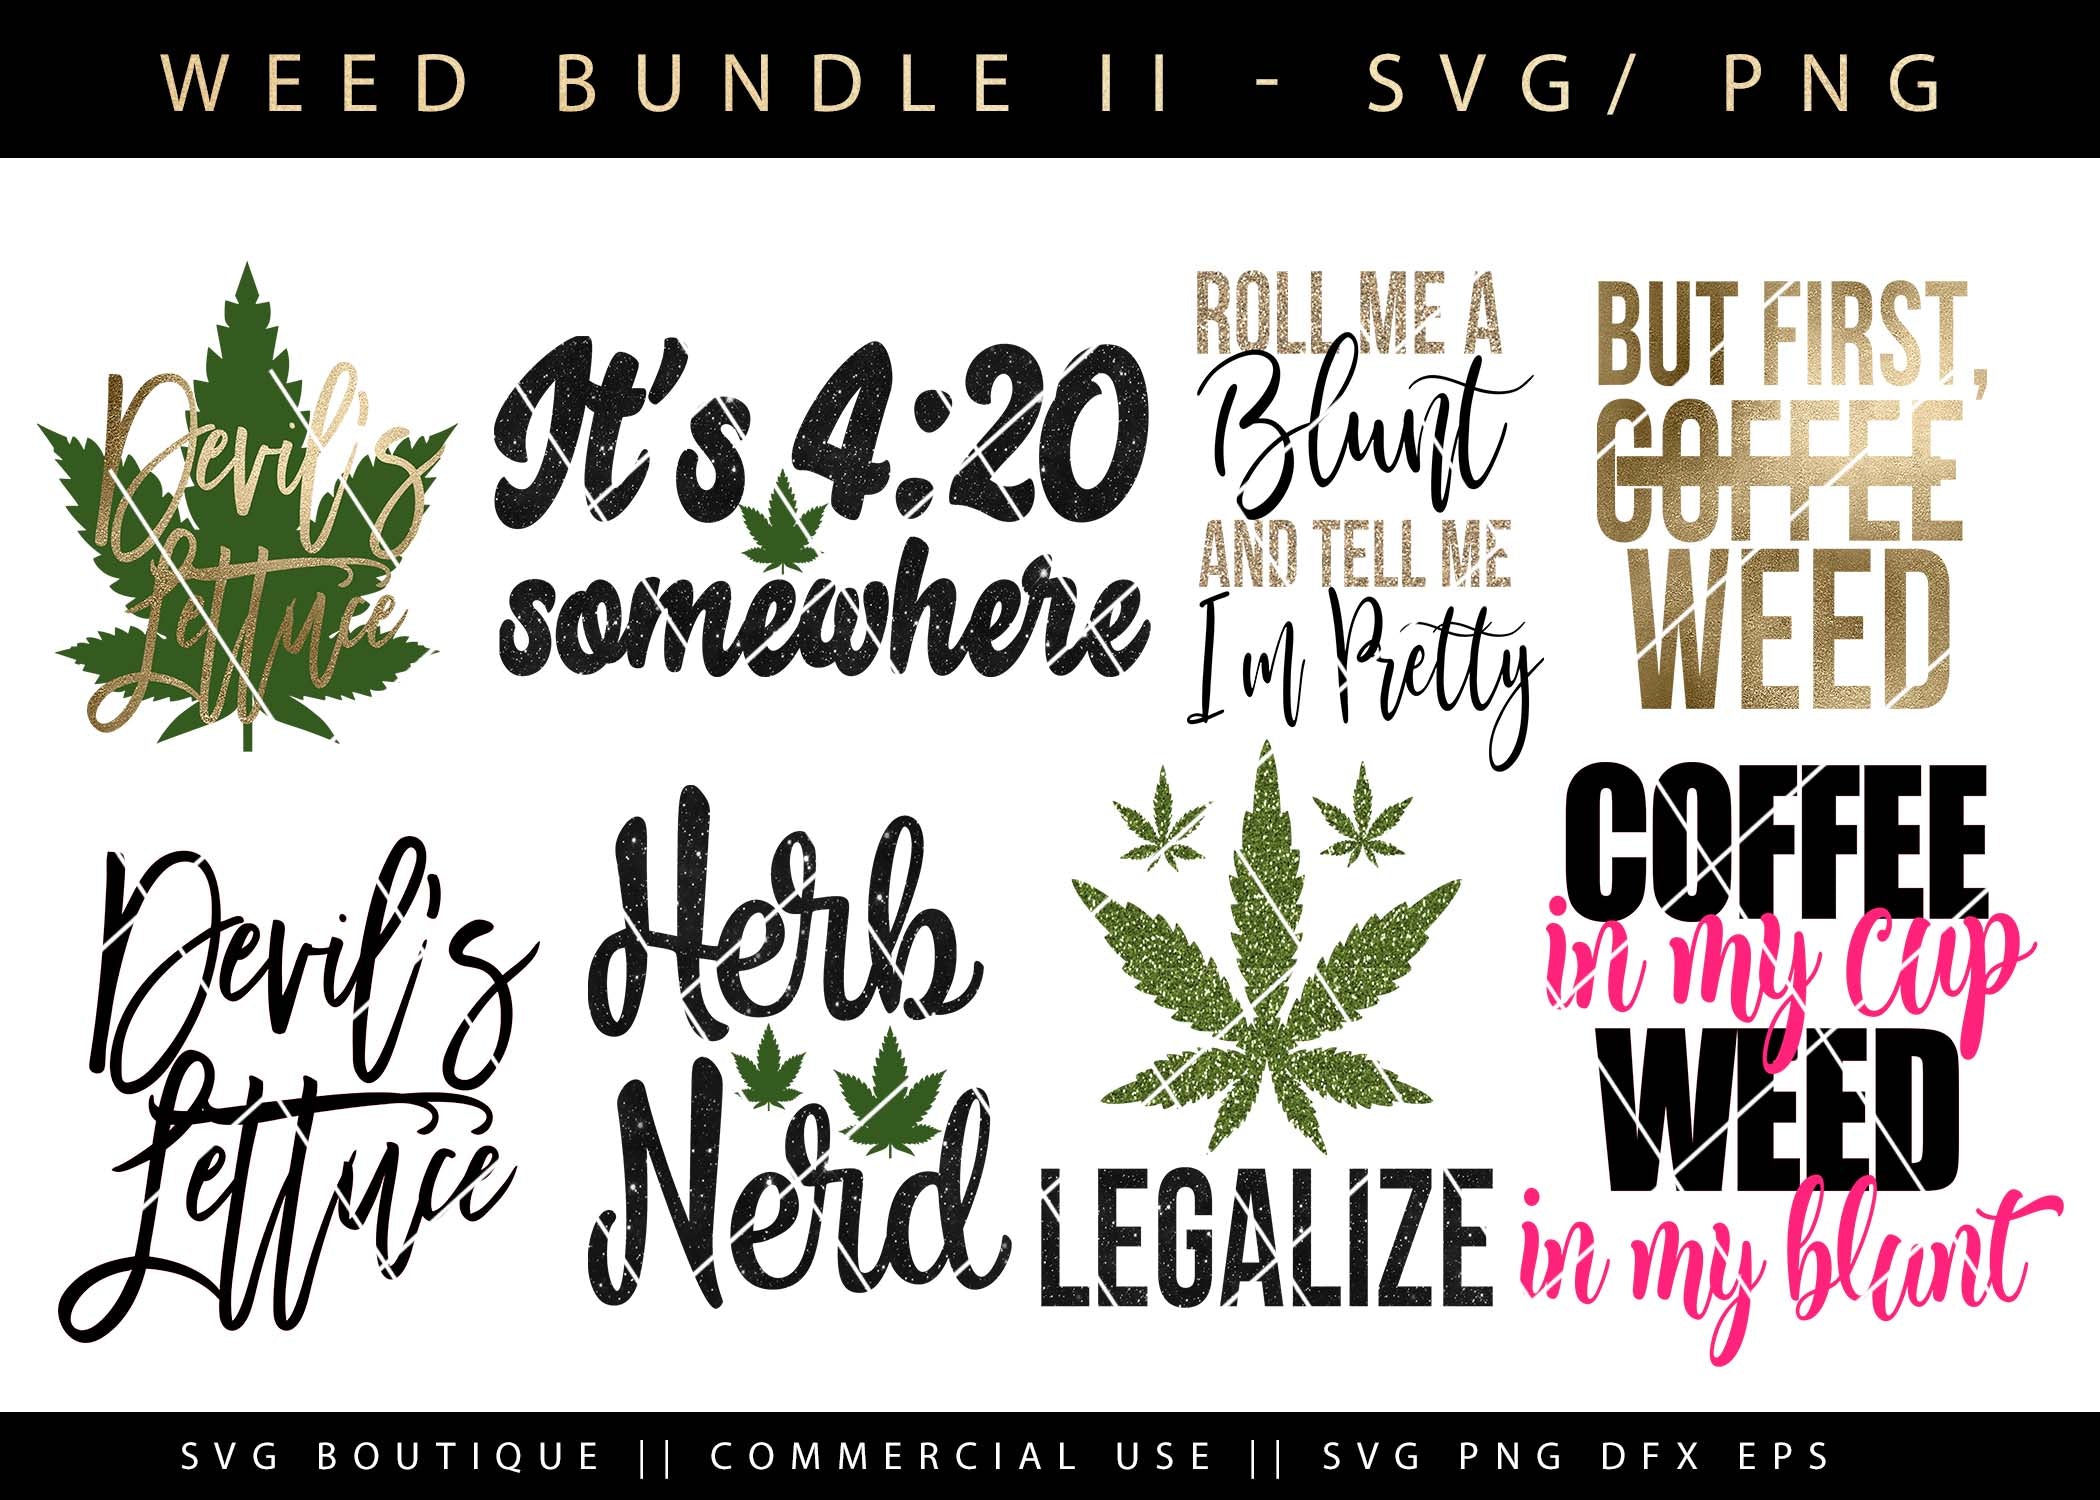 Download Weed Tray Bundle Version 2 - 10 Weed/Dope SVG Cutting Files - SVG BOUTIQUE